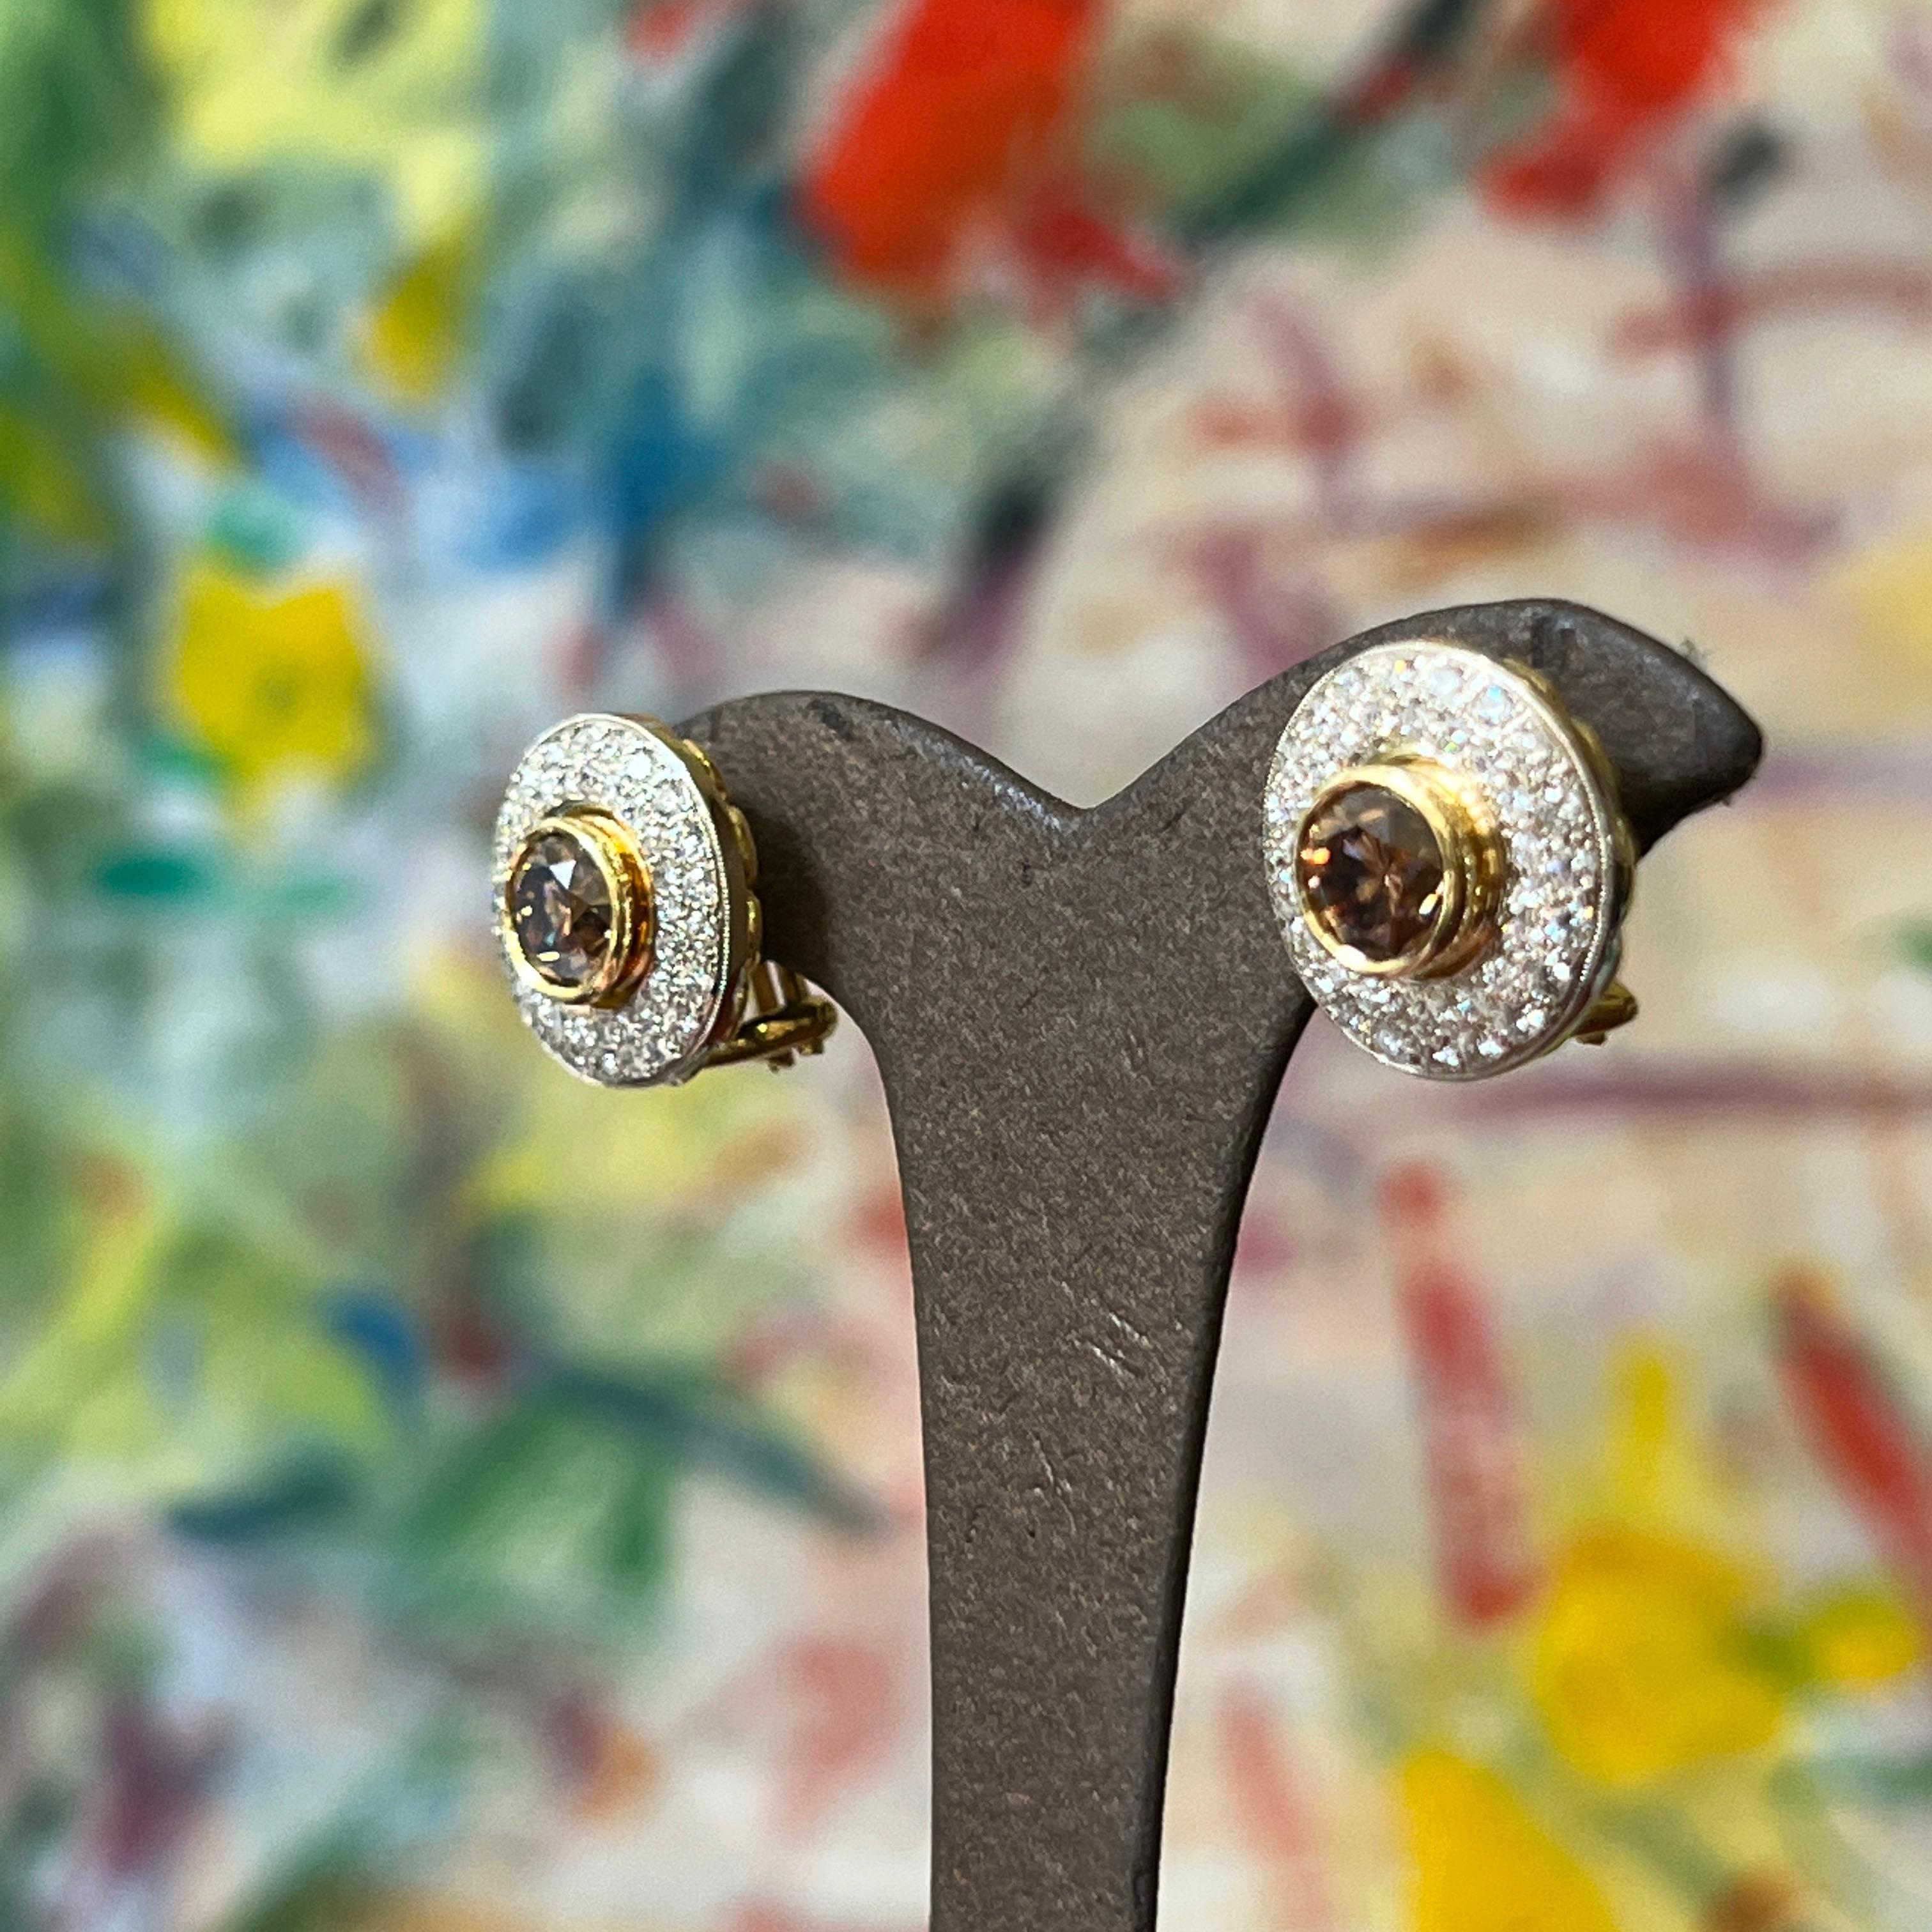 Designed and handmade by Mark Areias Jewelers. Chocolate cognac round brilliant cut main diamonds are bezel set in 18K yellow gold. Surrounded by pave set premium white round brilliant cut diamonds in white gold. The earrings are a round shape